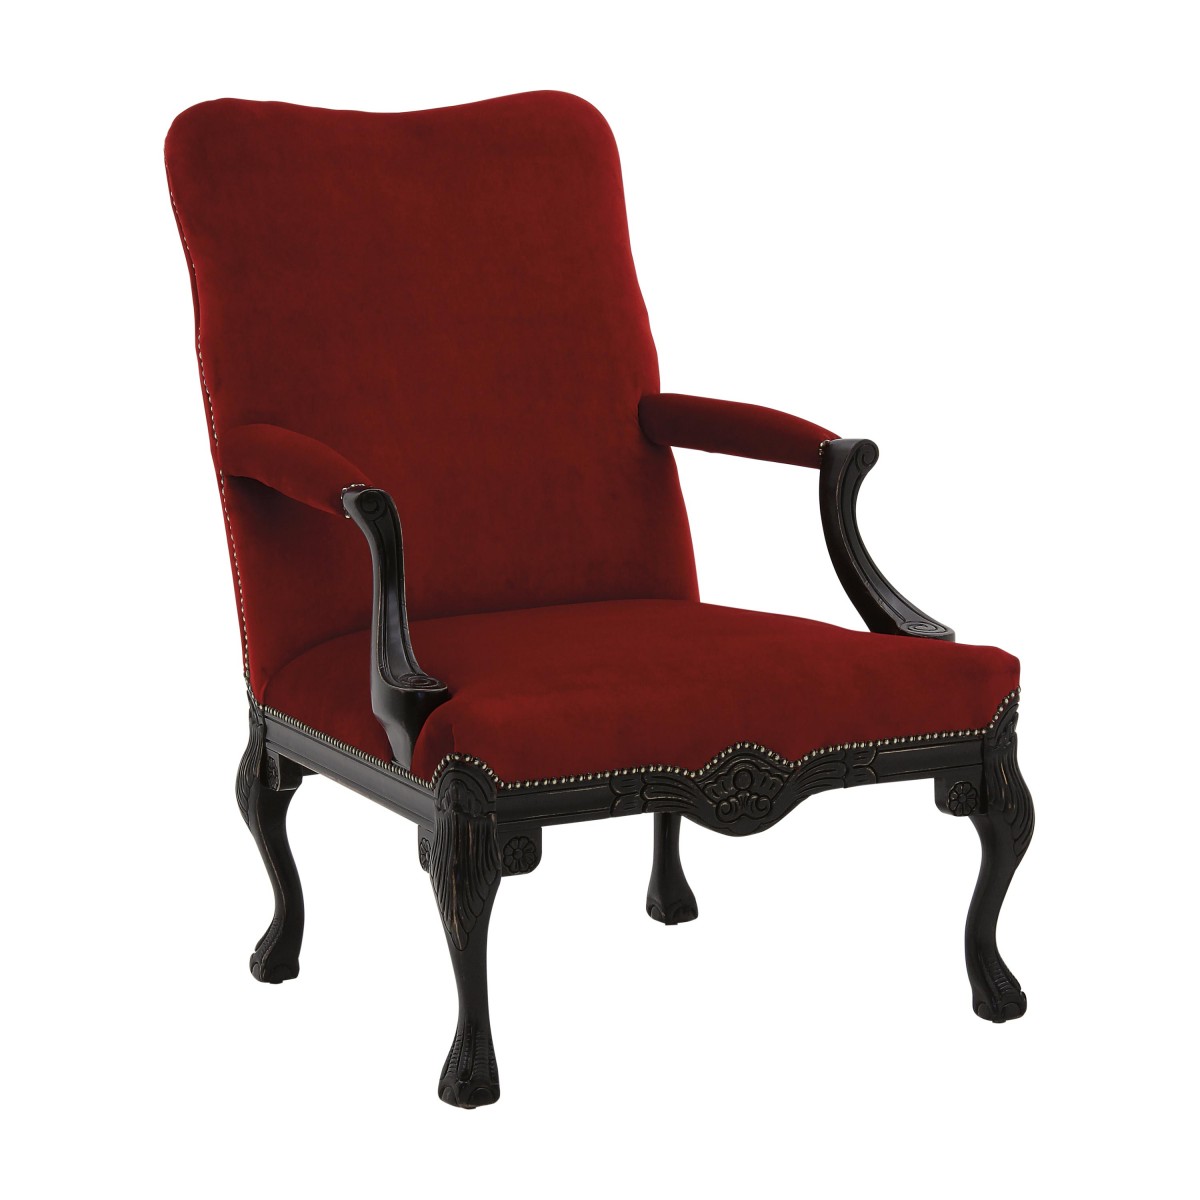 classic style wooden armchair